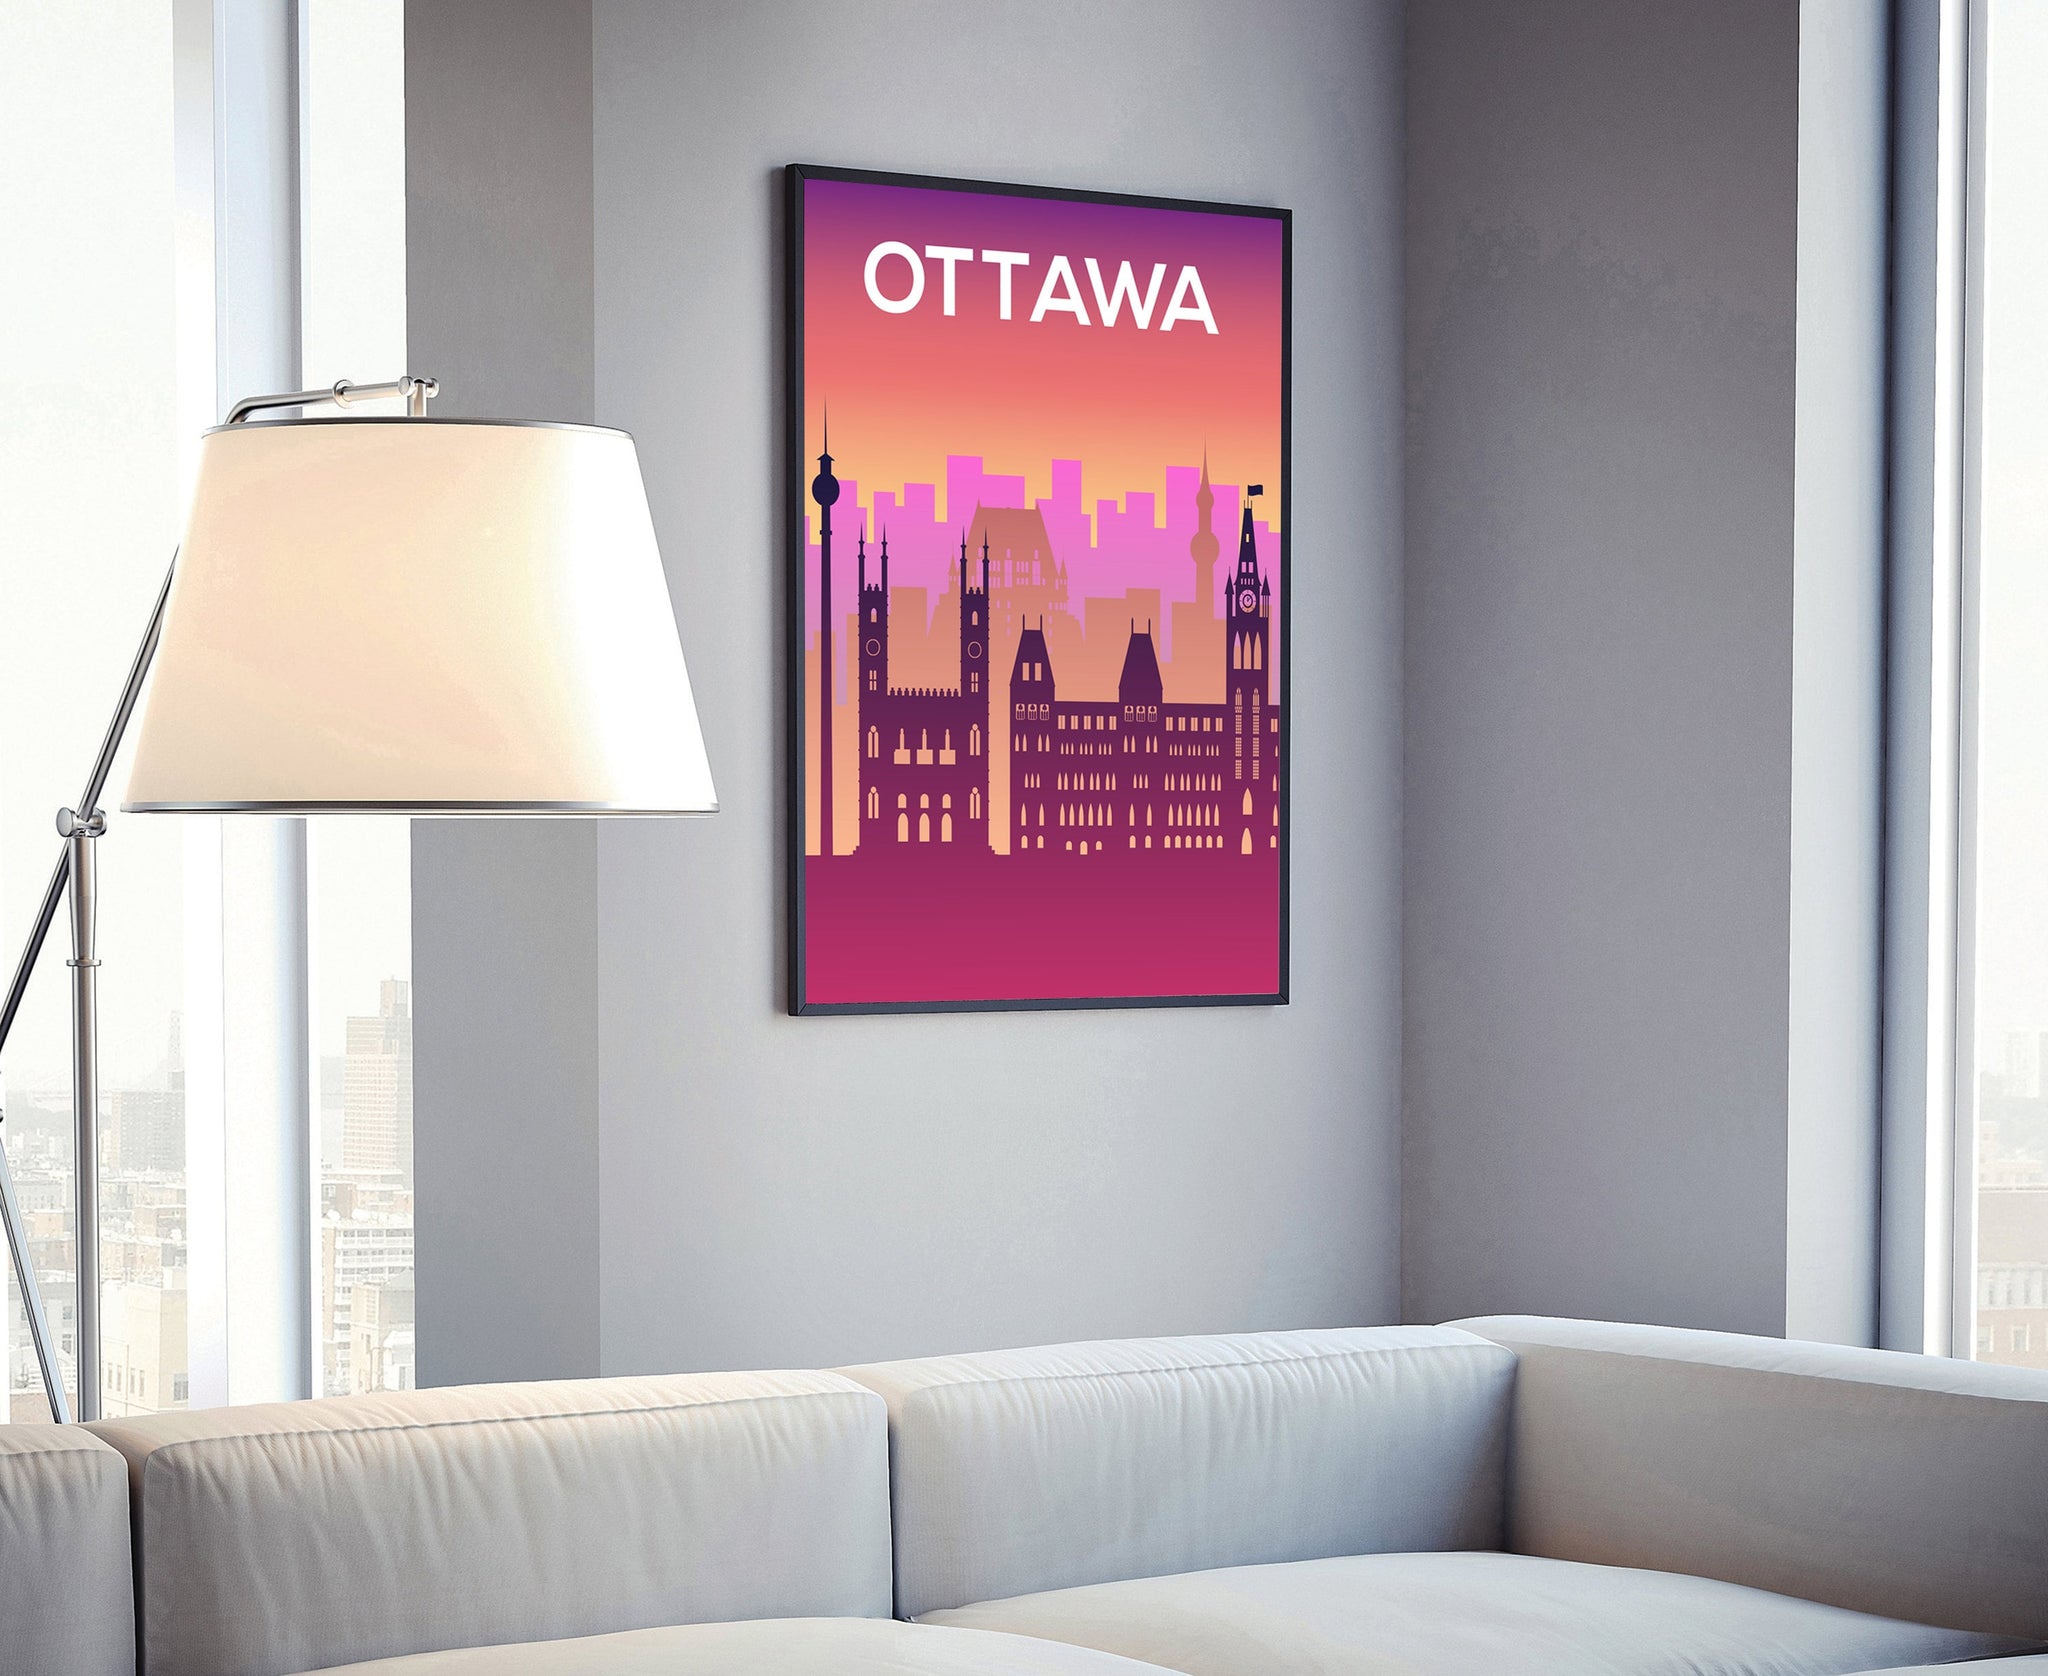 Solid Color World City Poster, Canada Ottawa Solid Color Modern Poster Print, Ottawa Modern City Poster, Office and Home Wall Decoration